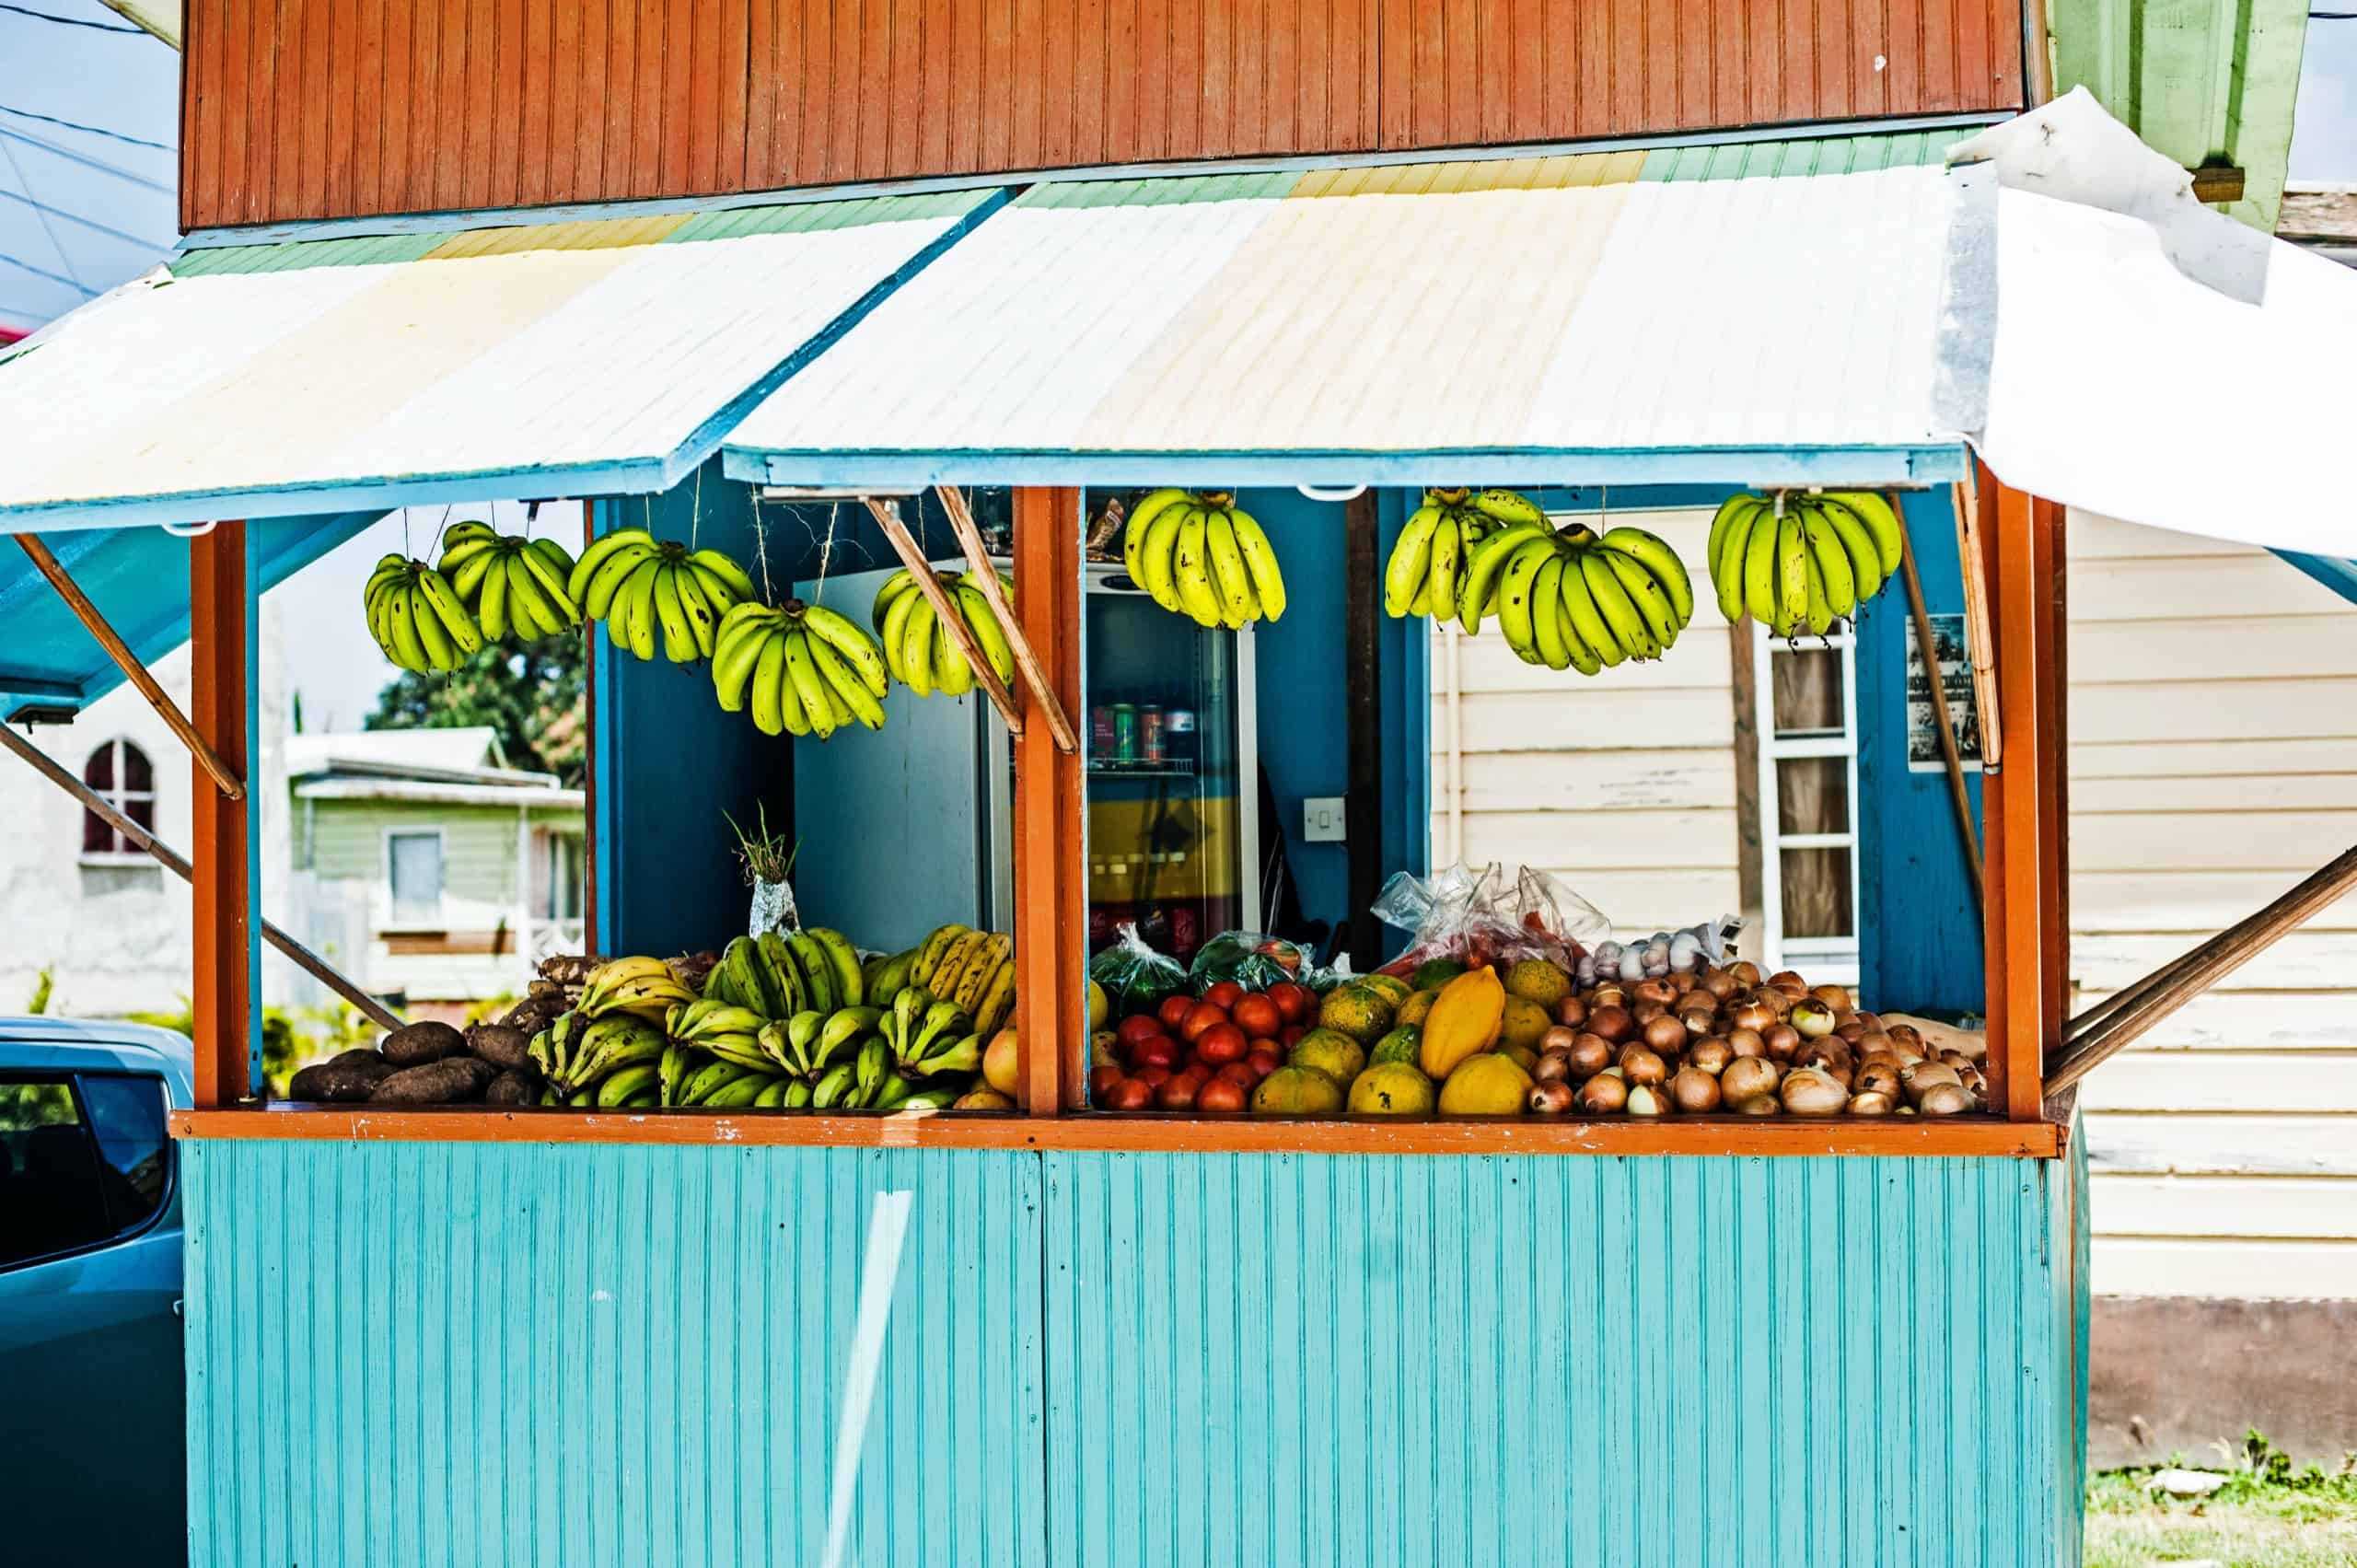 Fruit stand in Barbados